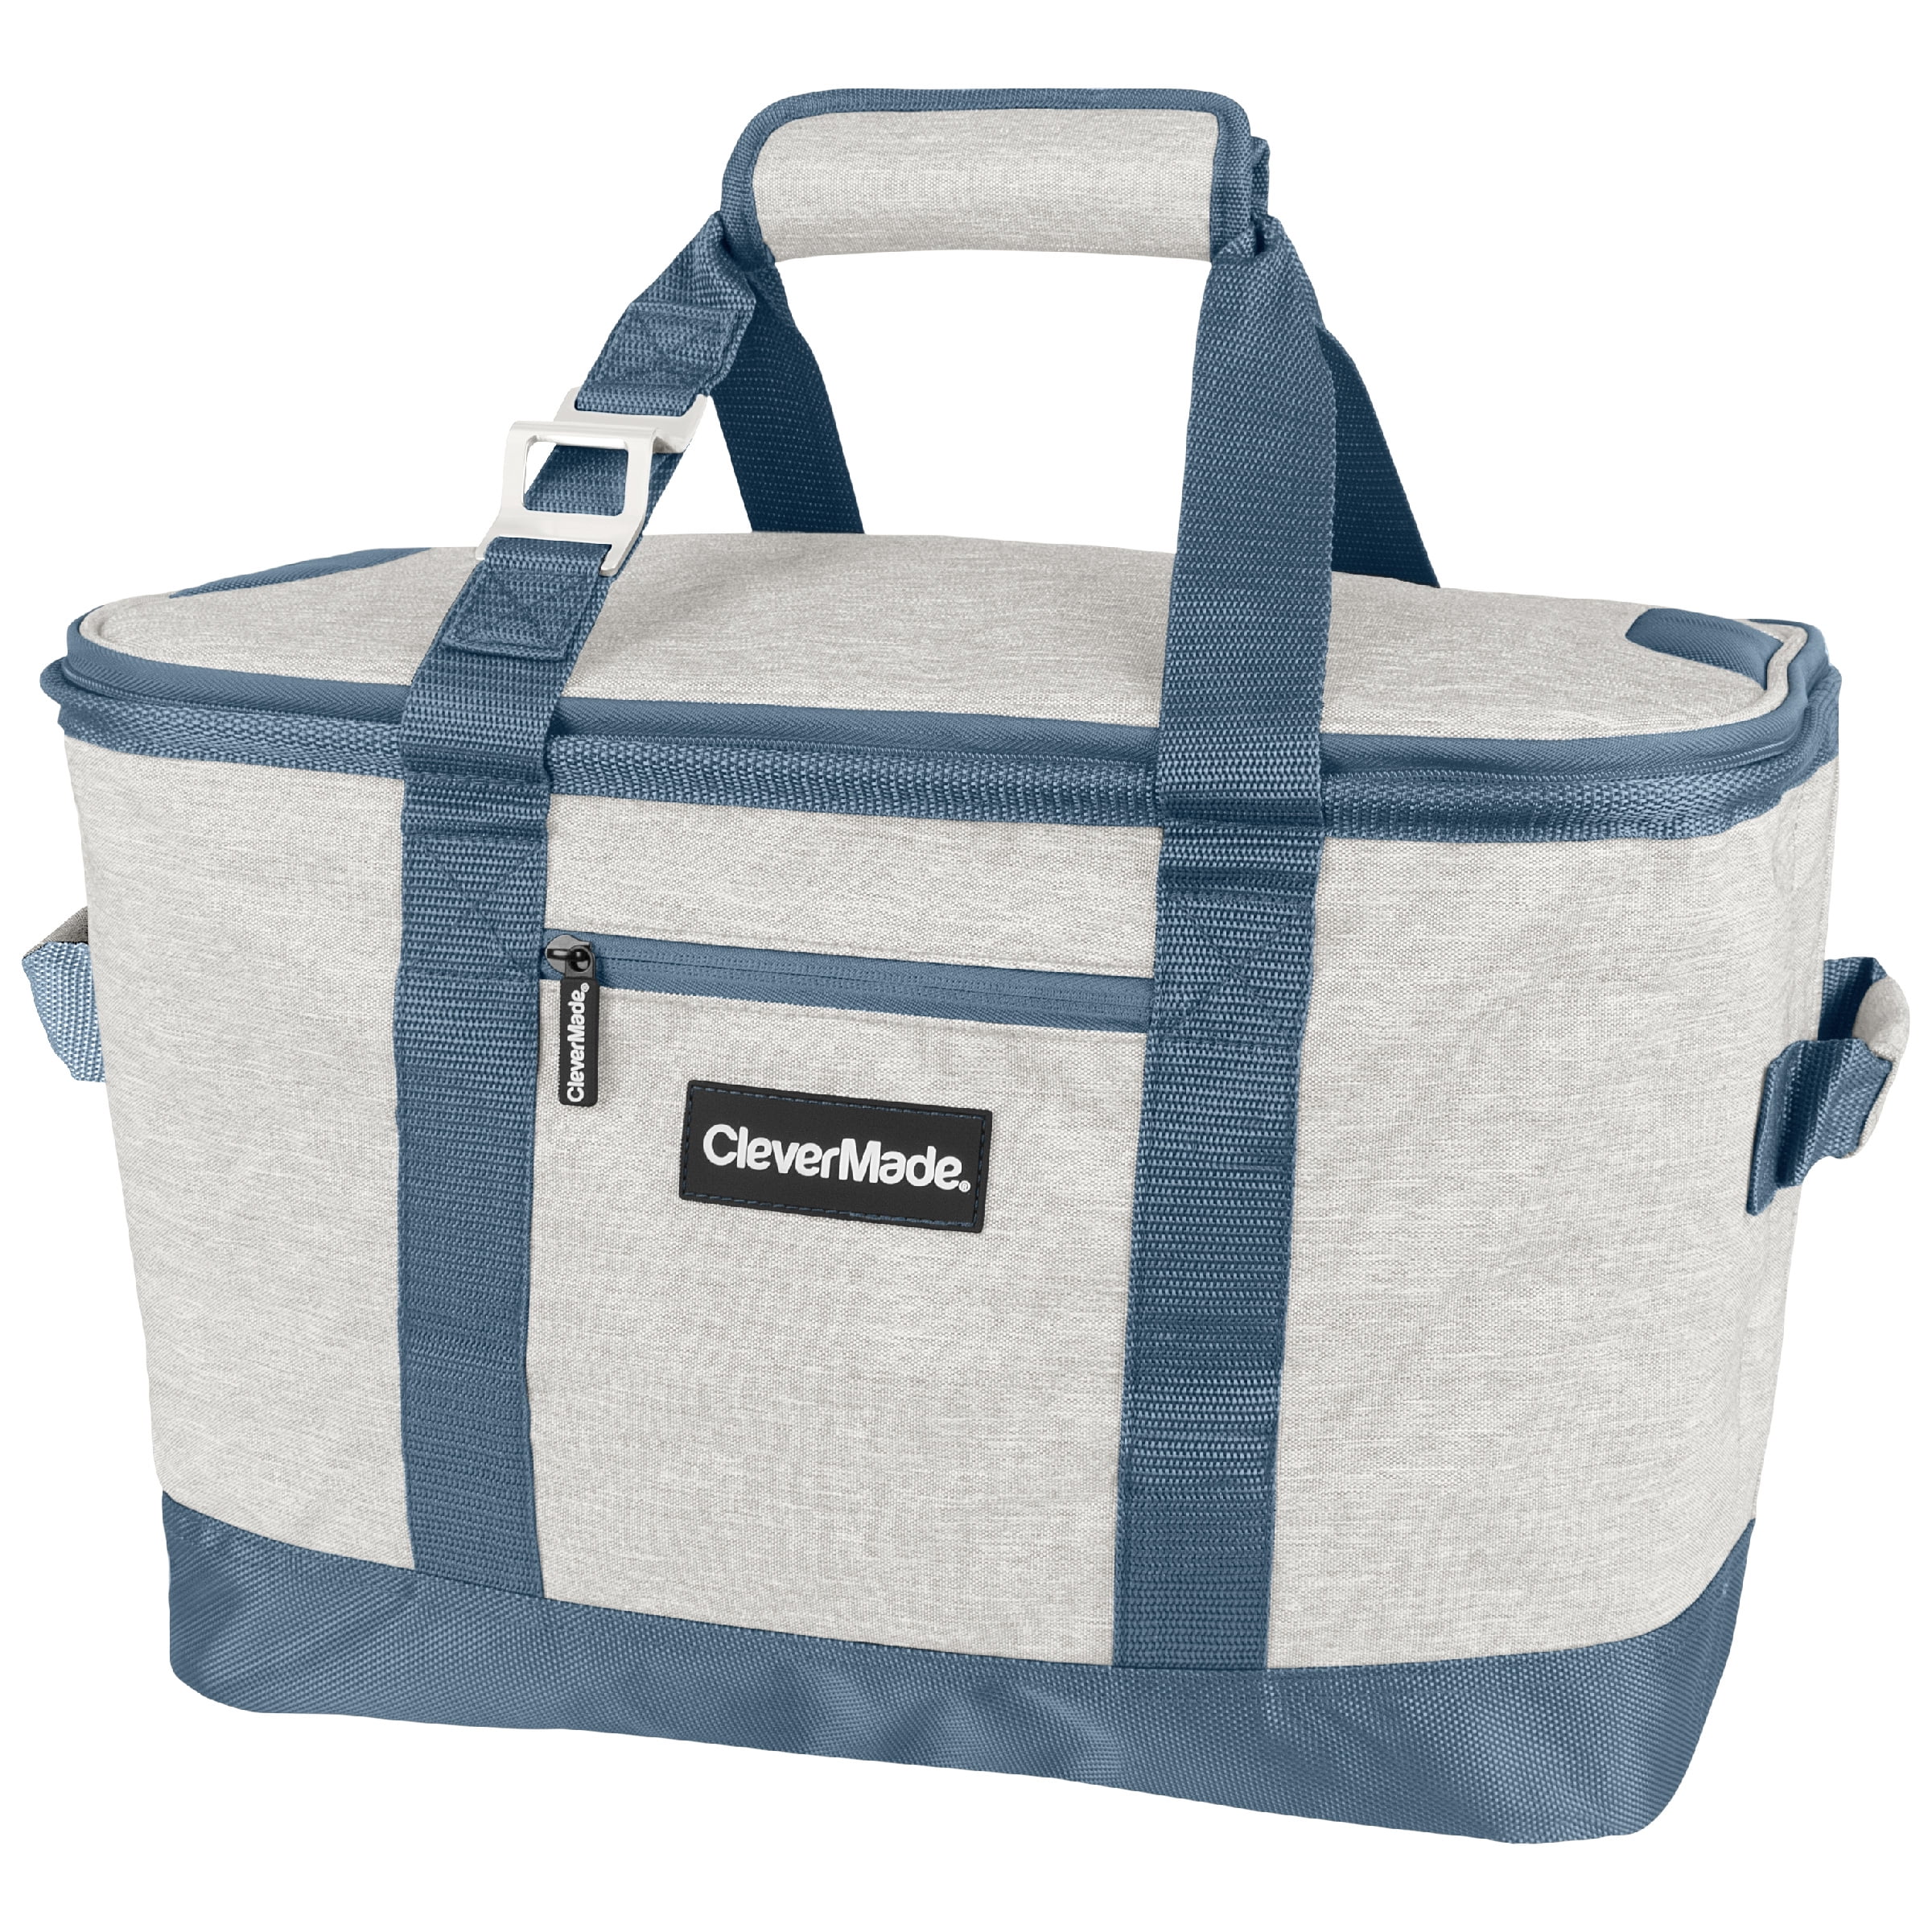 Prime Exclusive Deal: CleverMade Coolers As Low As $17.99